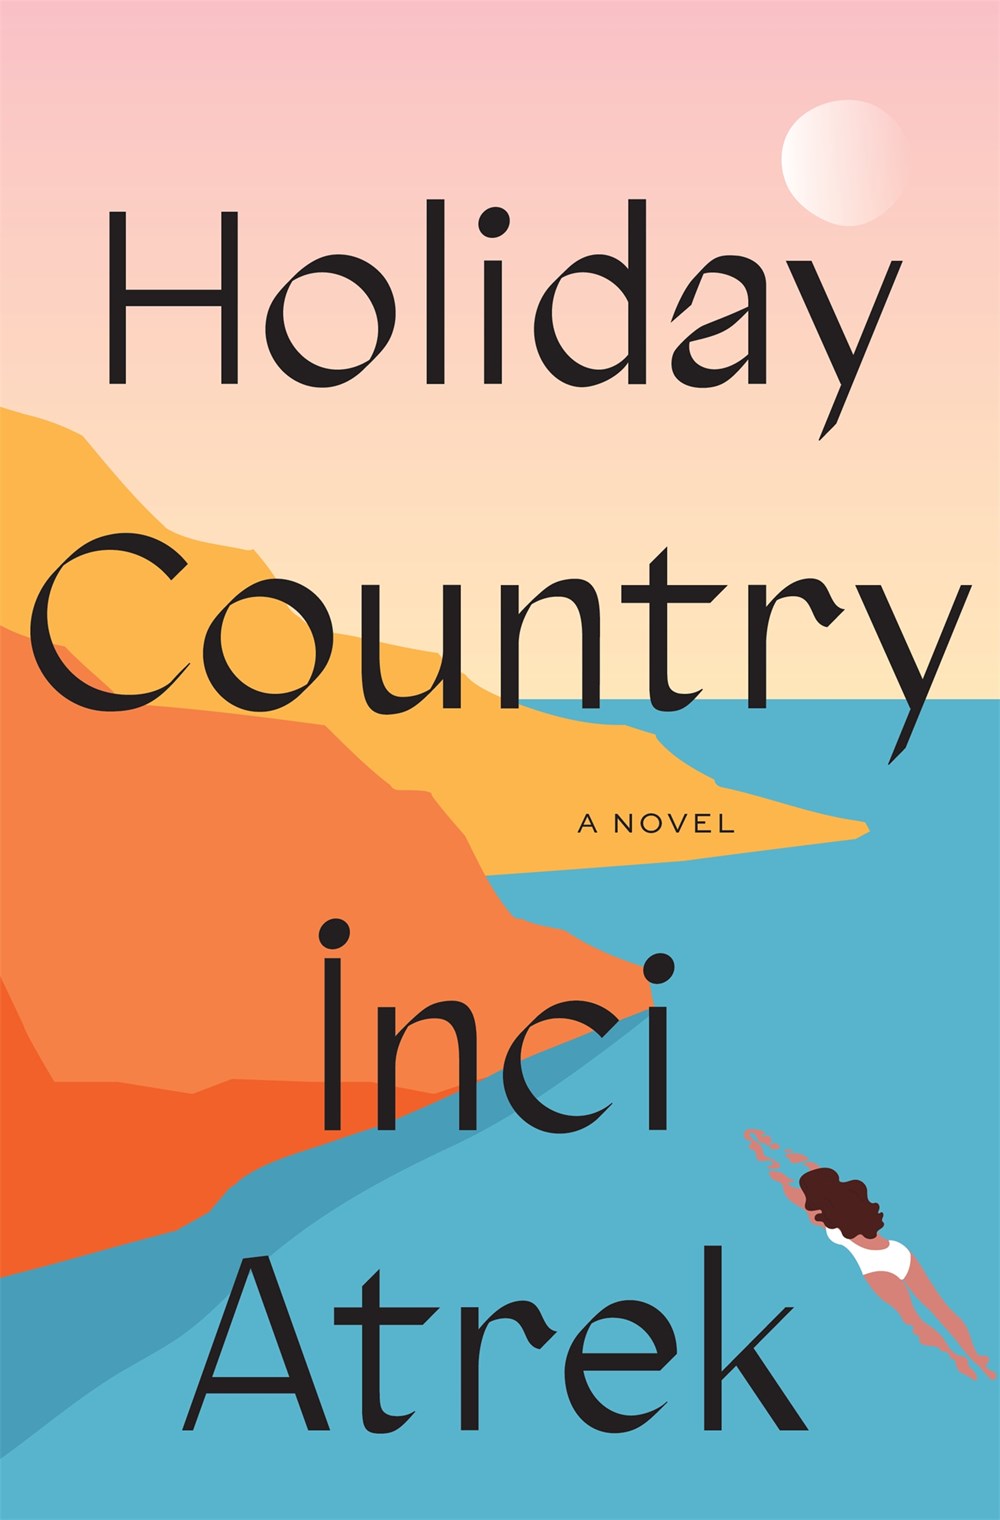 Holiday Country by Inci